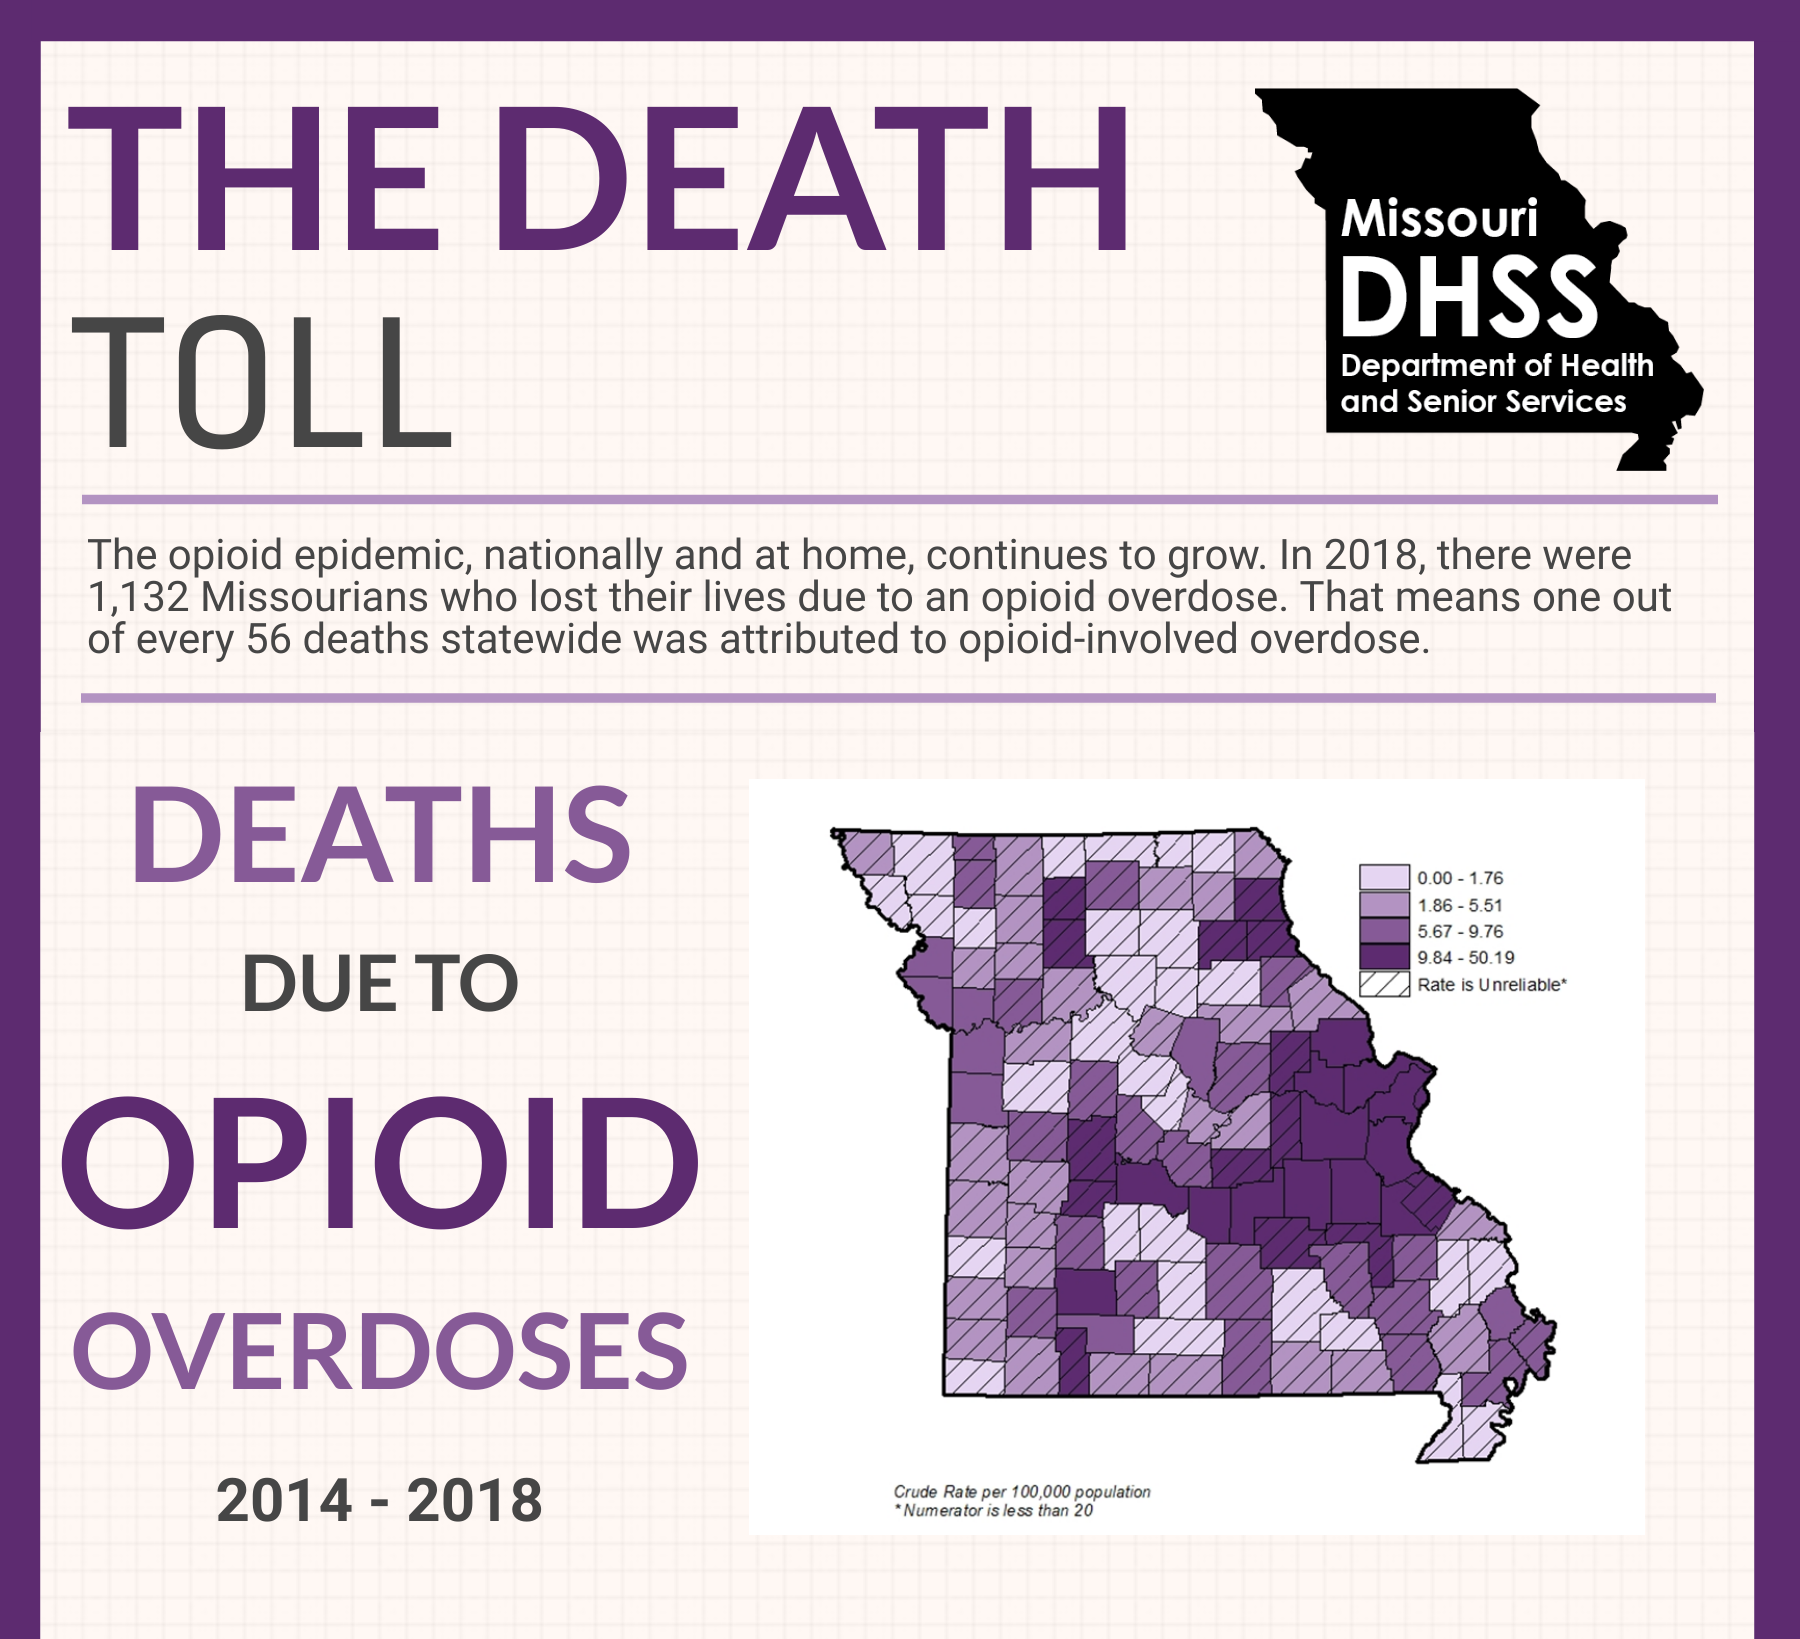 opioid the death toll deaths due to opioid overdoses image